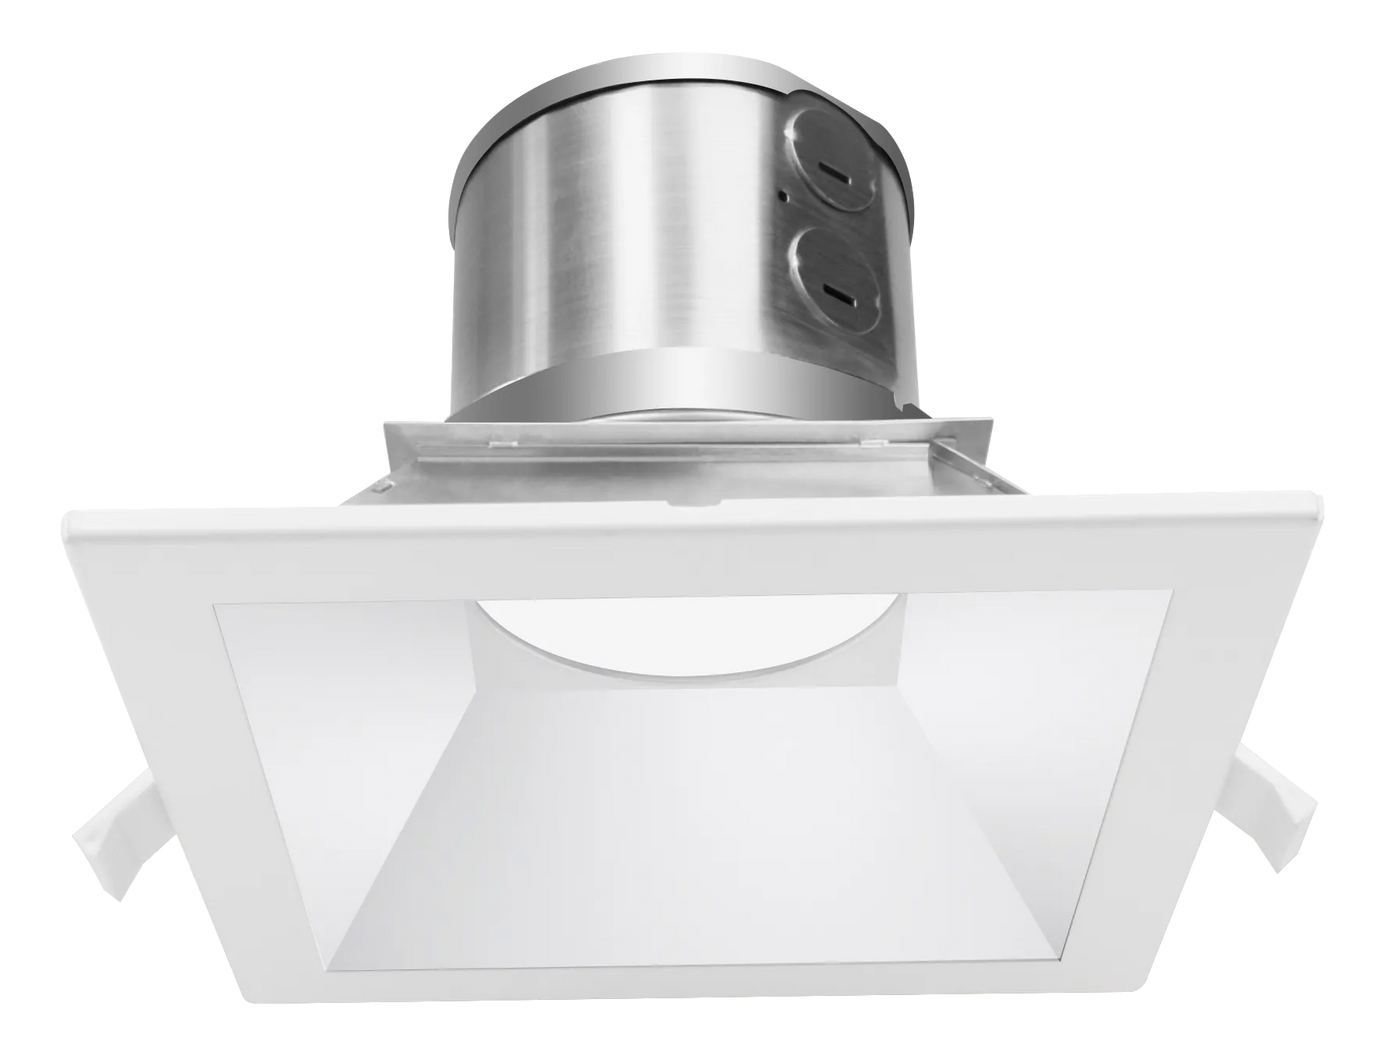 6" LED SQUARE COMMERCIAL RECESSED LIGHT, 3200 LUMEN MAX, WATTAGE AND CCT SELECTABLE, 120-277V, HAZE OR WHITE